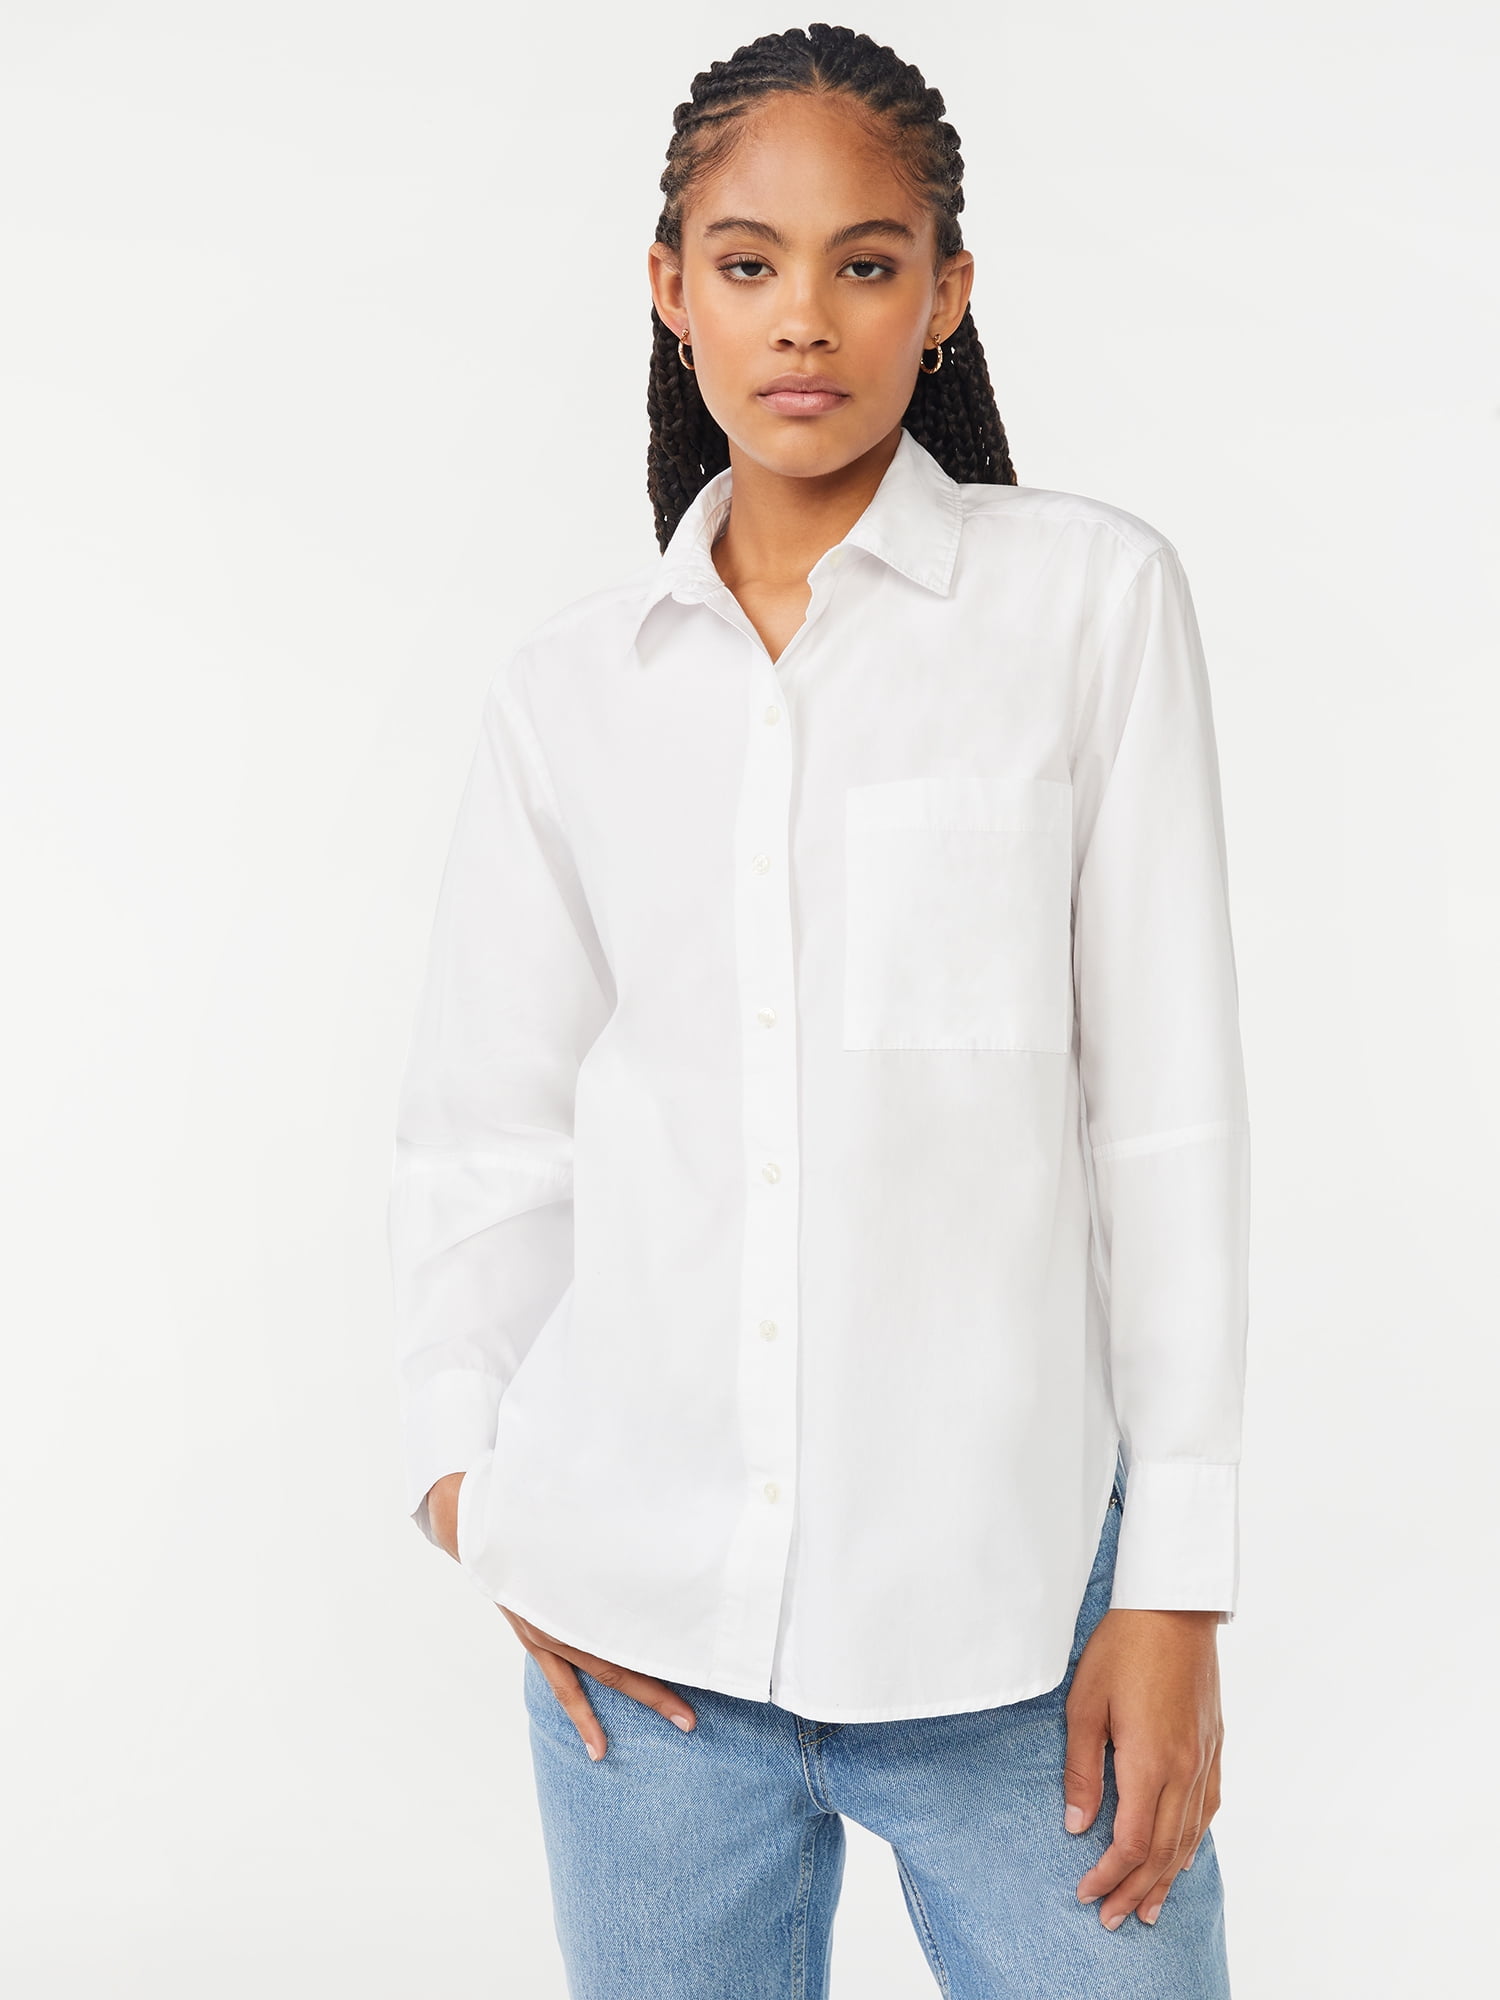 Free Assembly Women's Boxy Button Down Tunic Top